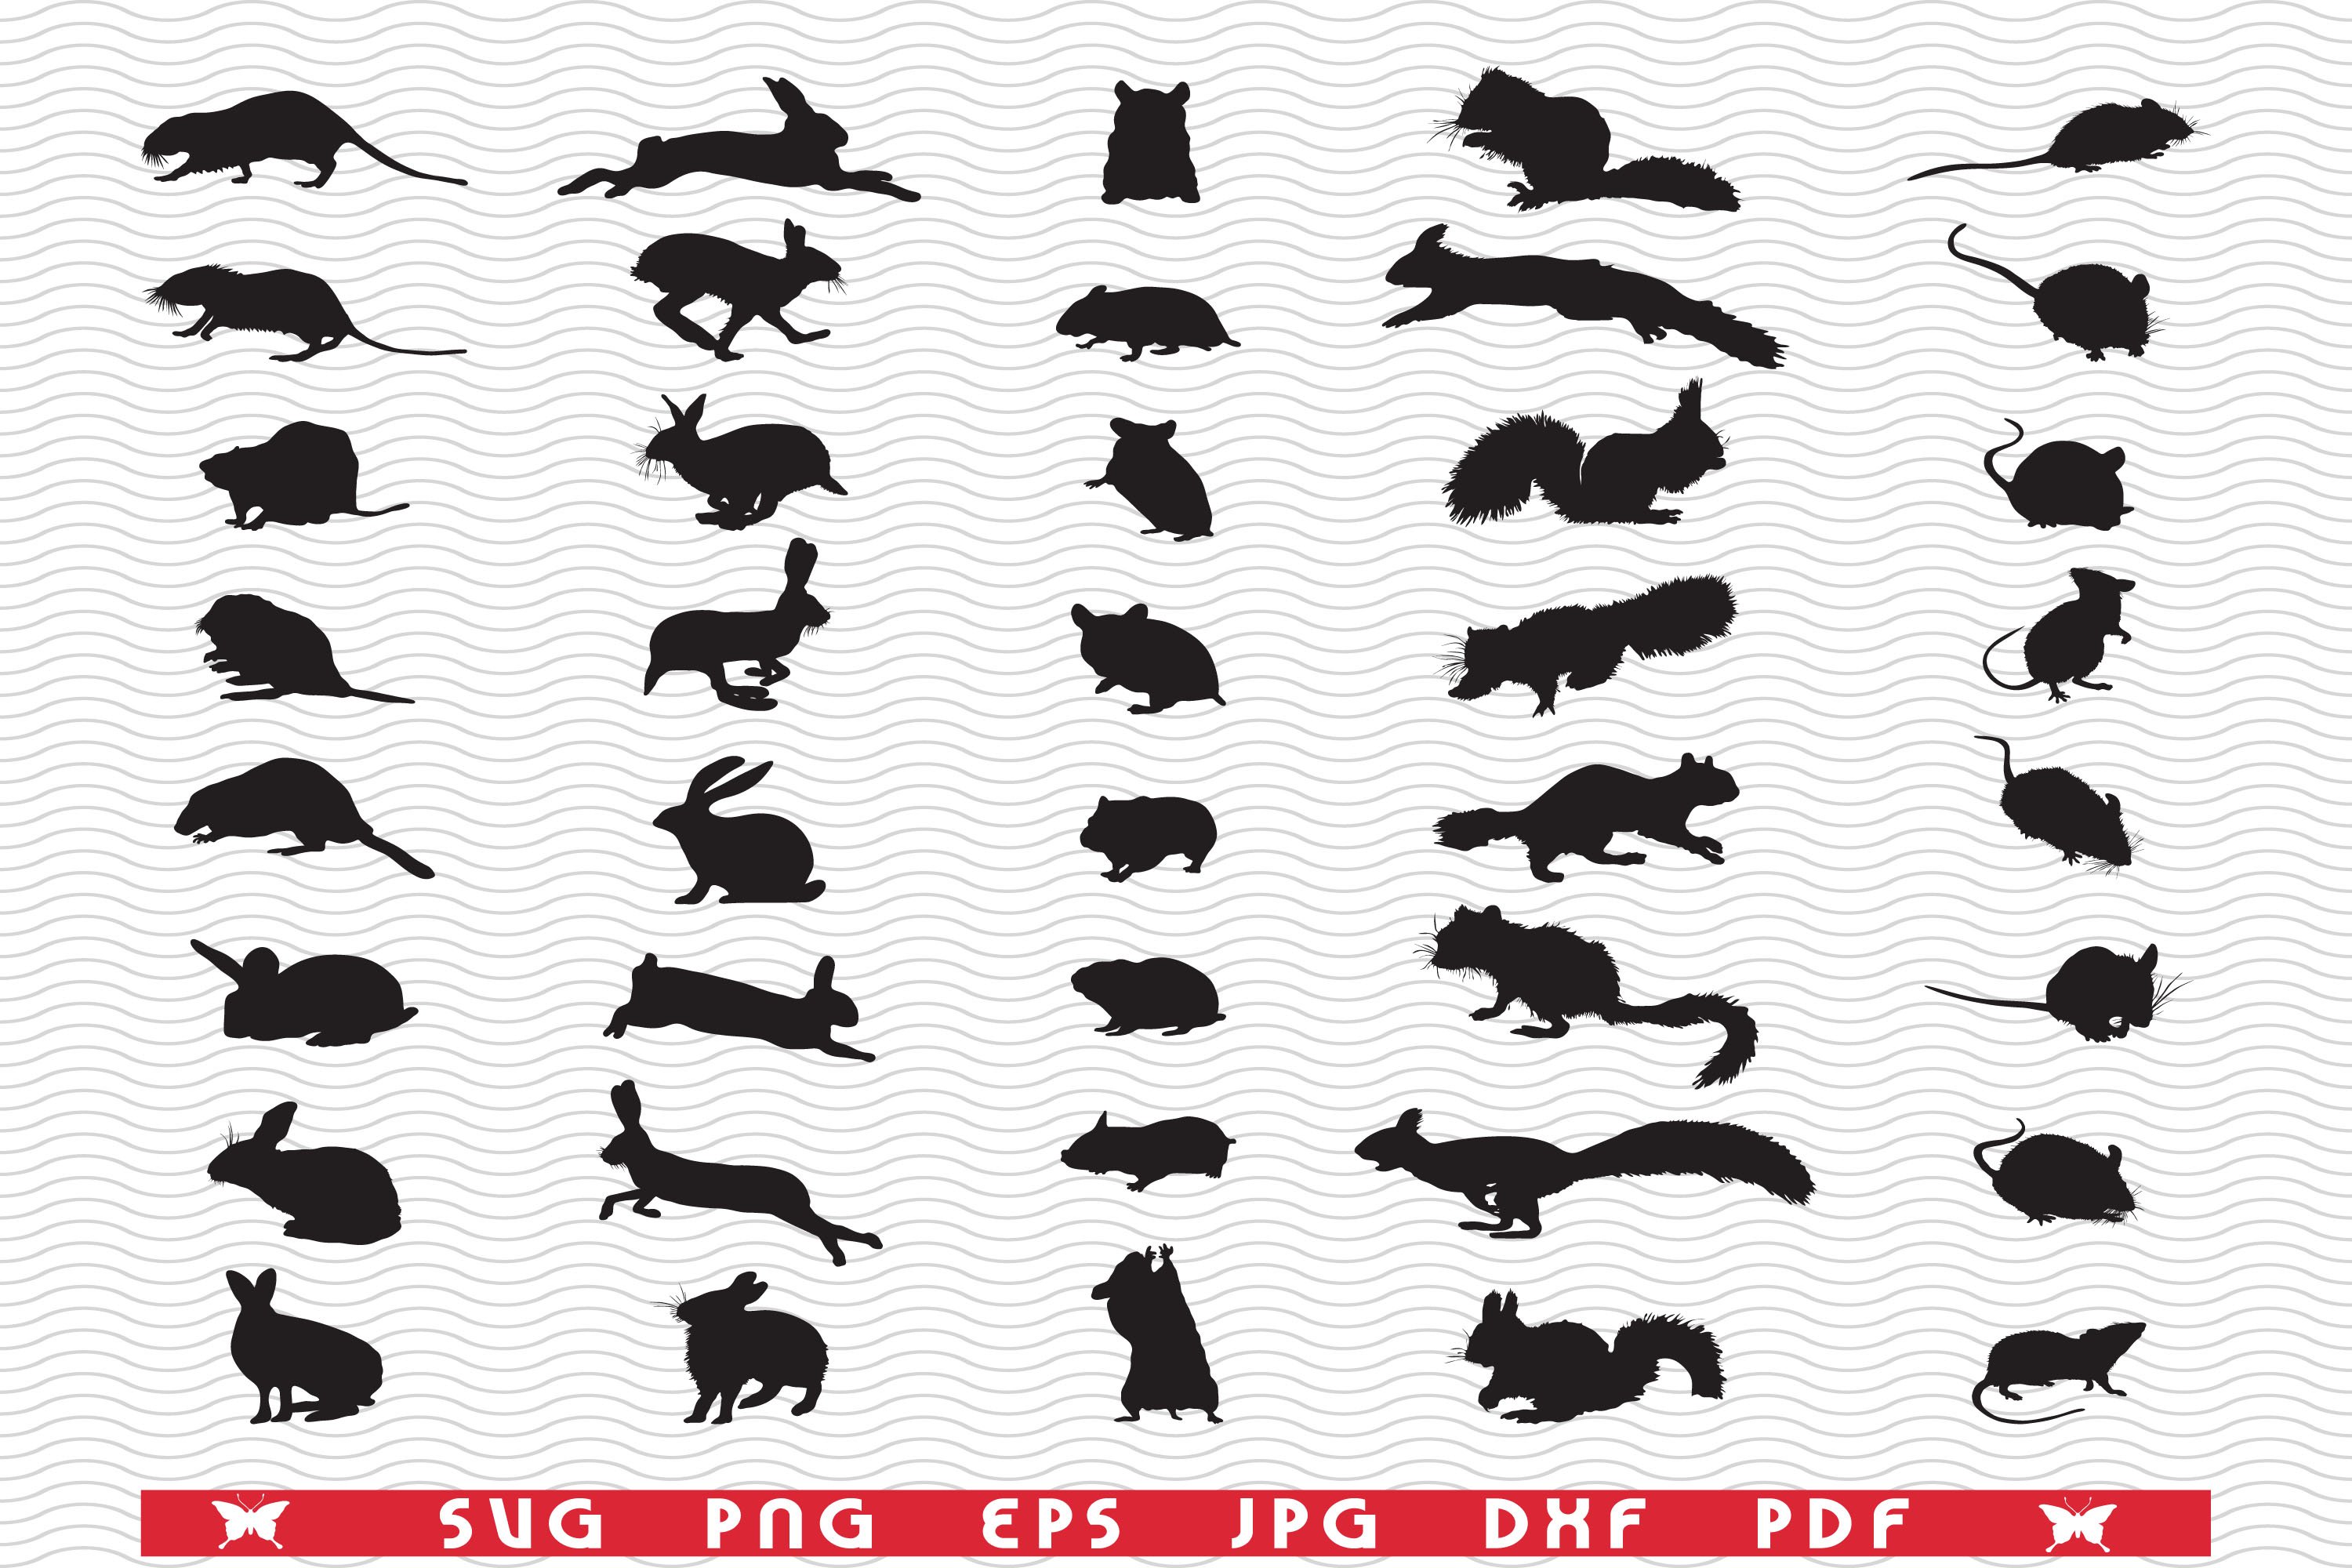 SVG Rodents, Black Silhouettes cover image.